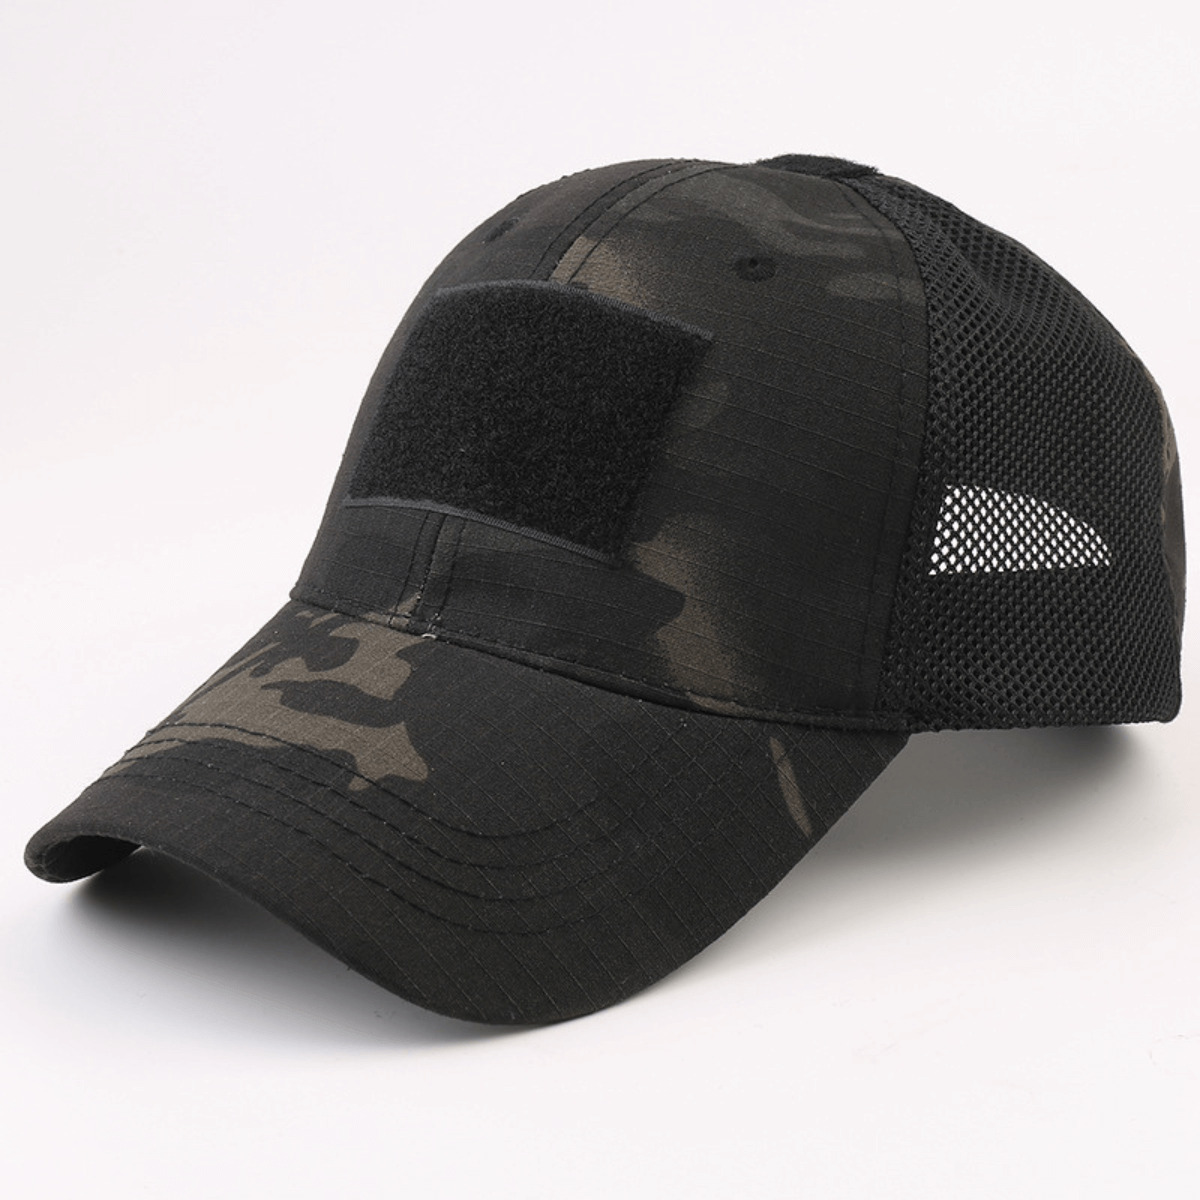 Tactical-Style Patch Hat With Adjustable Strap - Black Camo